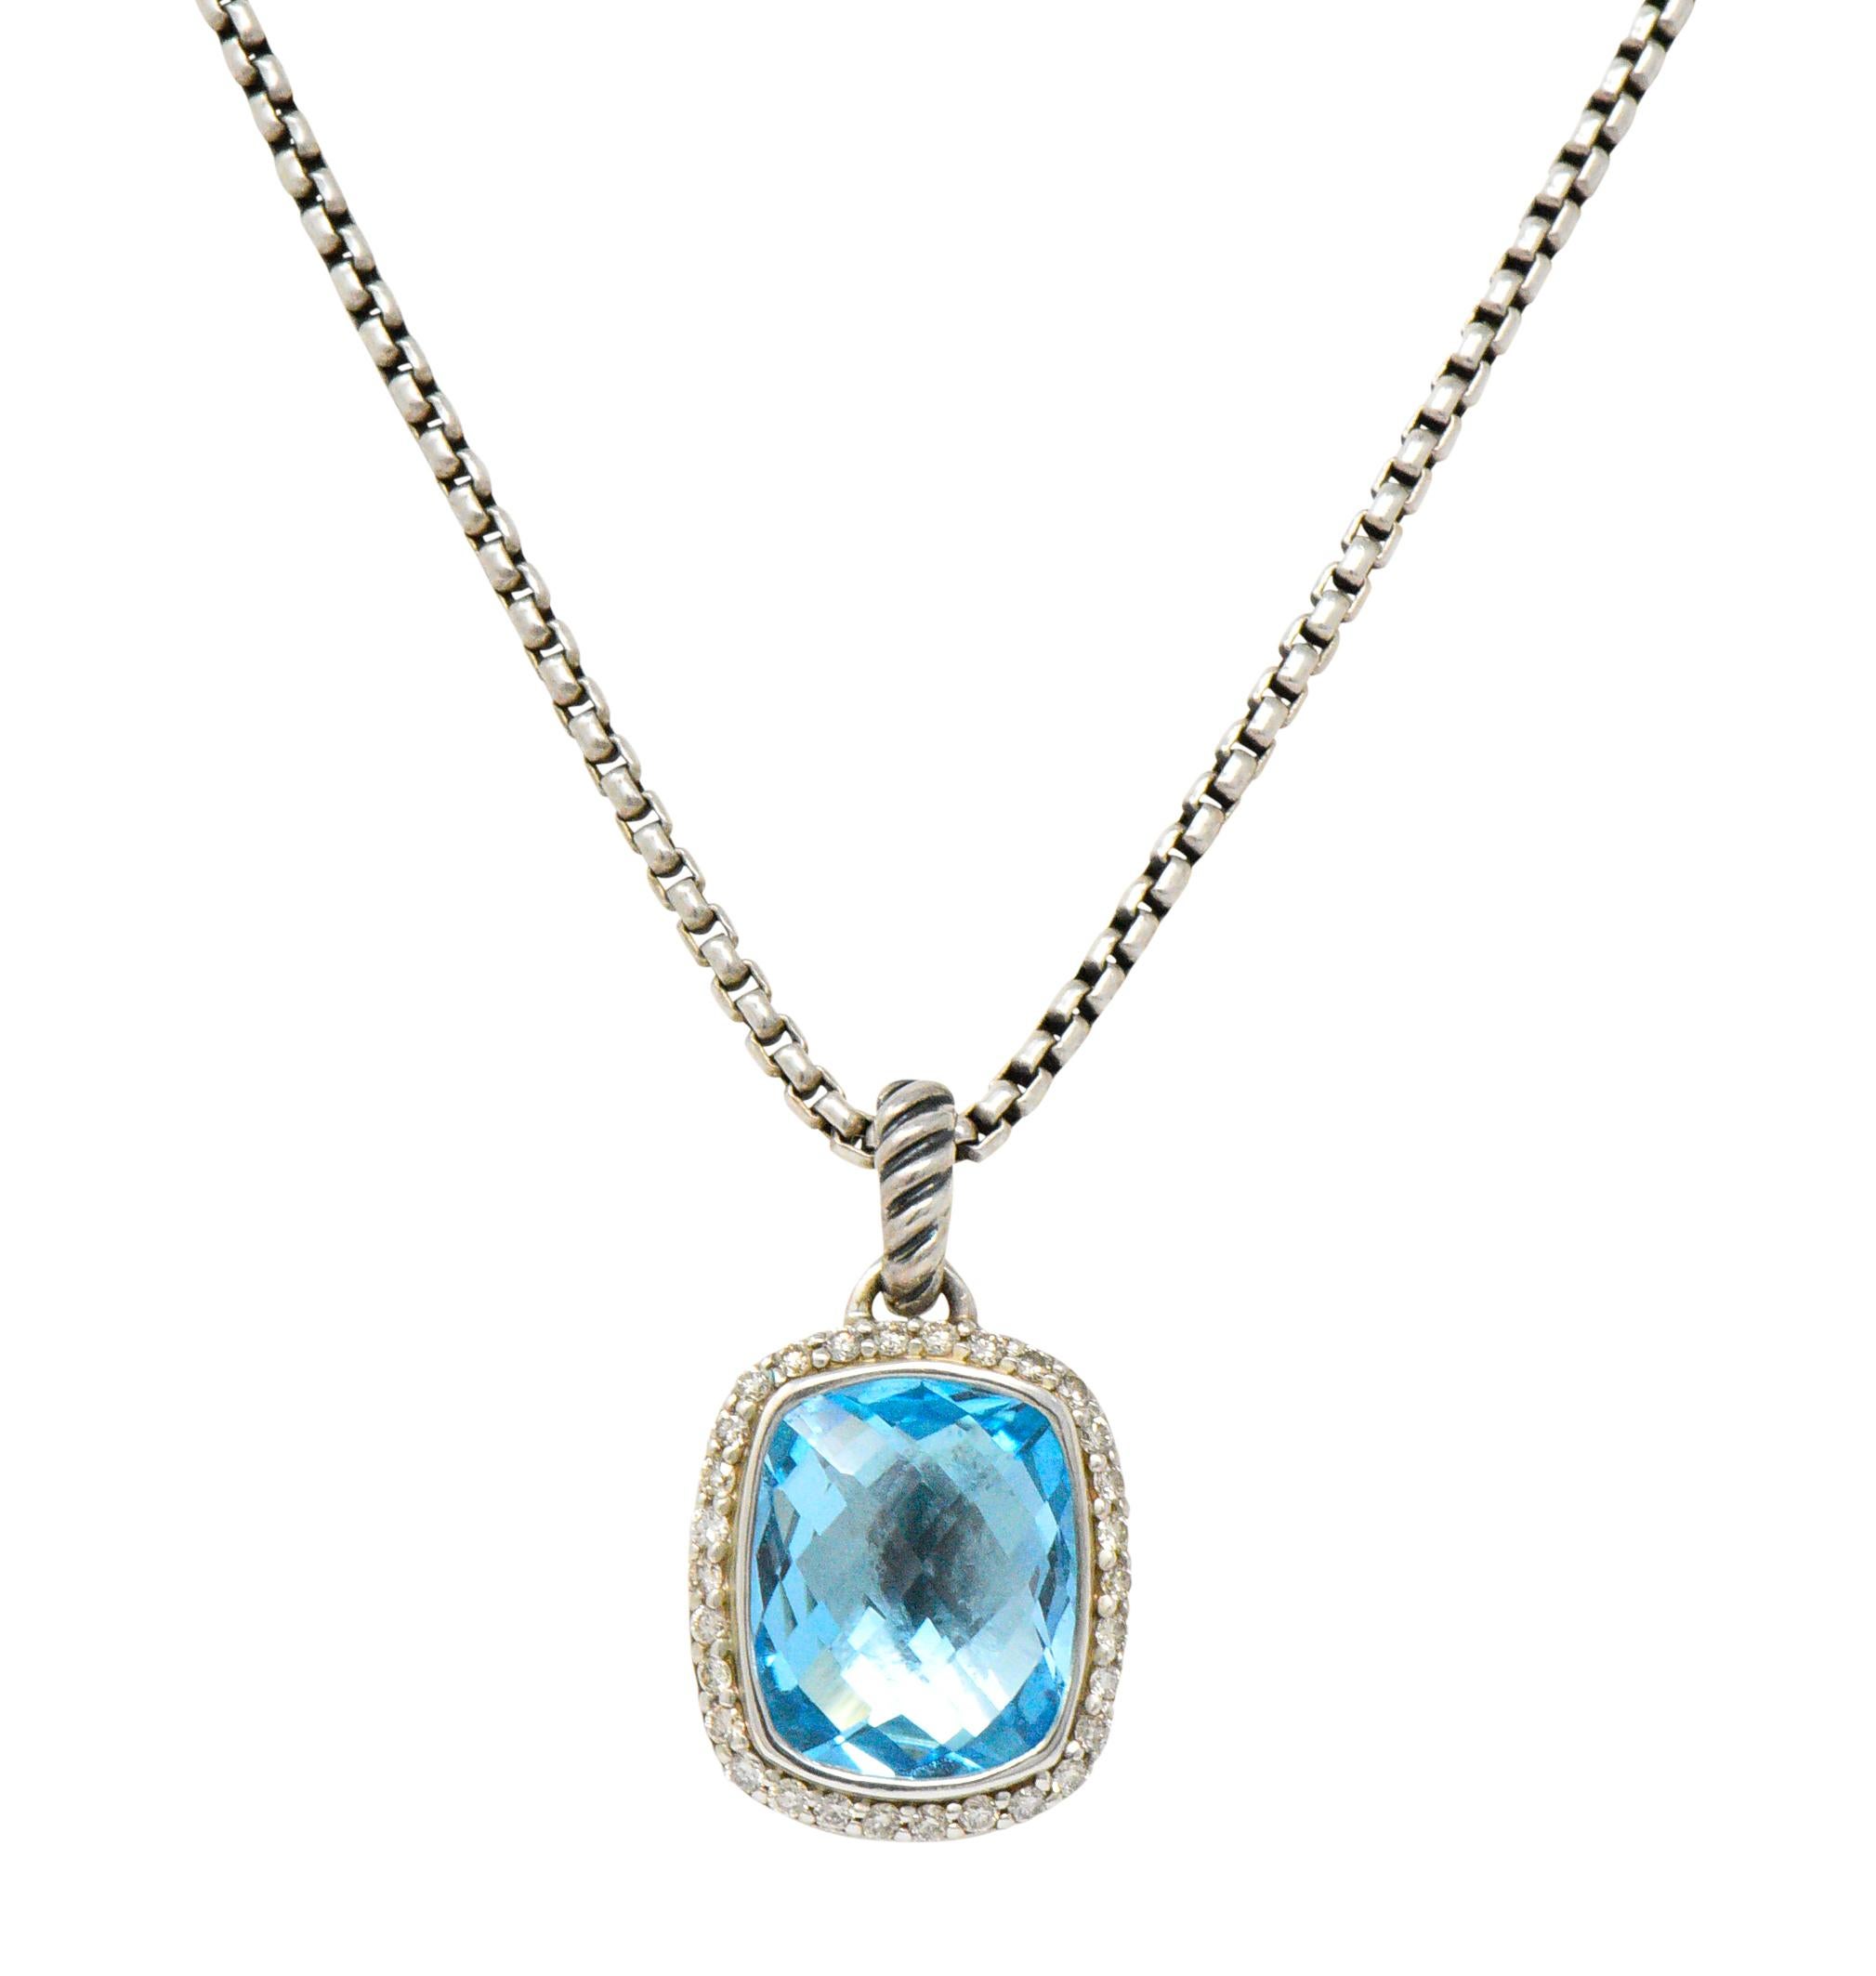 Featuring a bright blue faceted topaz bezel set in sterling silver

0.30 CTW of bright white and clean (32) diamonds

Cable link chain necklace with lobster claw clasp

Total Weight: 10.9 Grams

Measures: 16